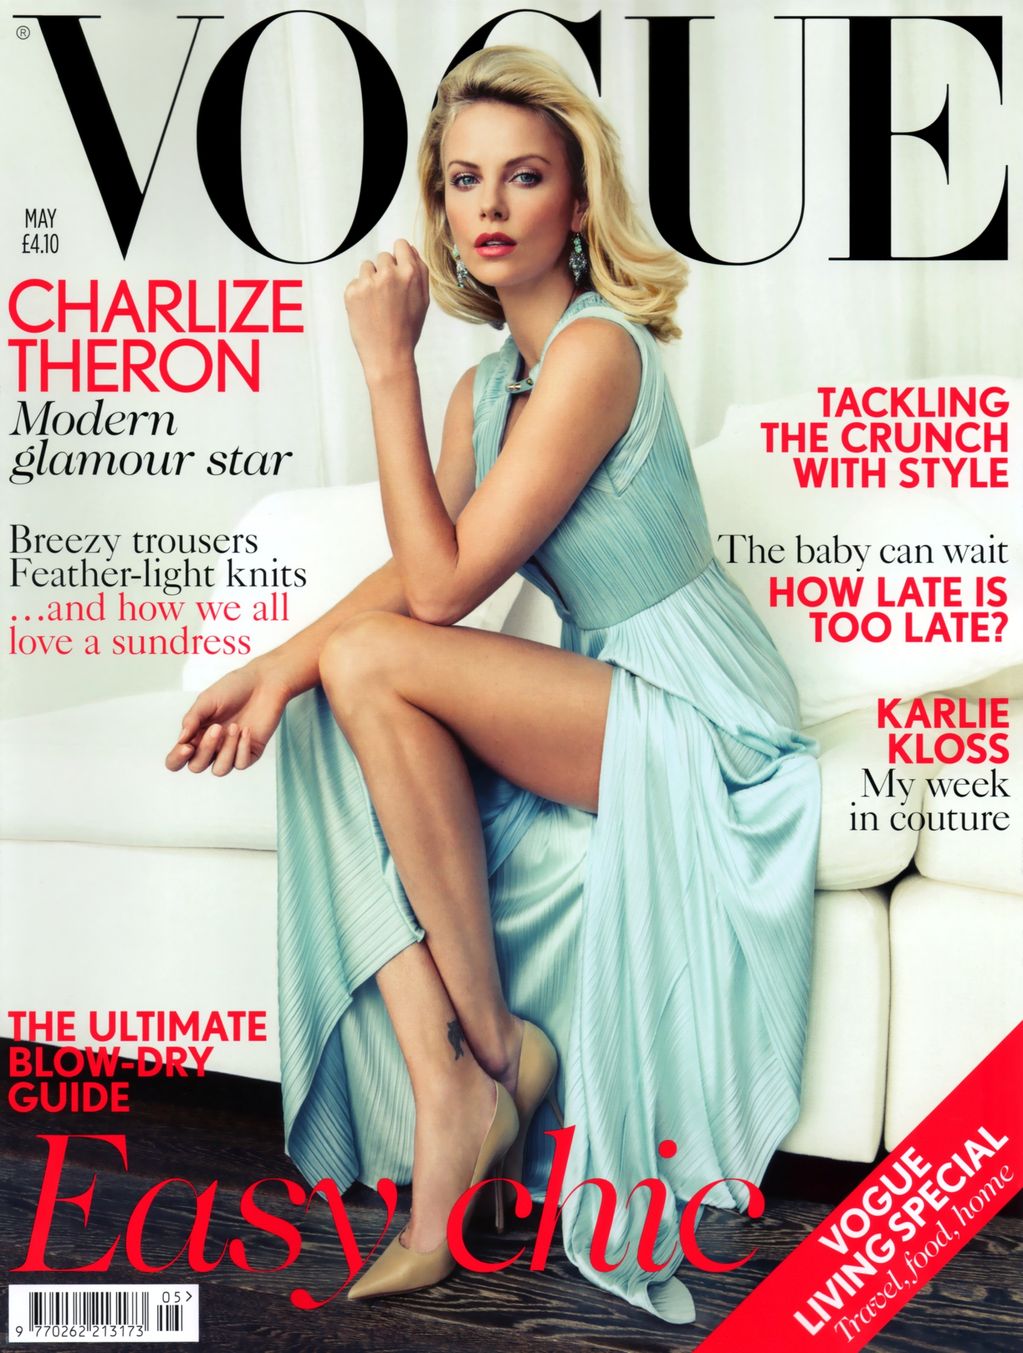 Charlize Theron Modeling Photos